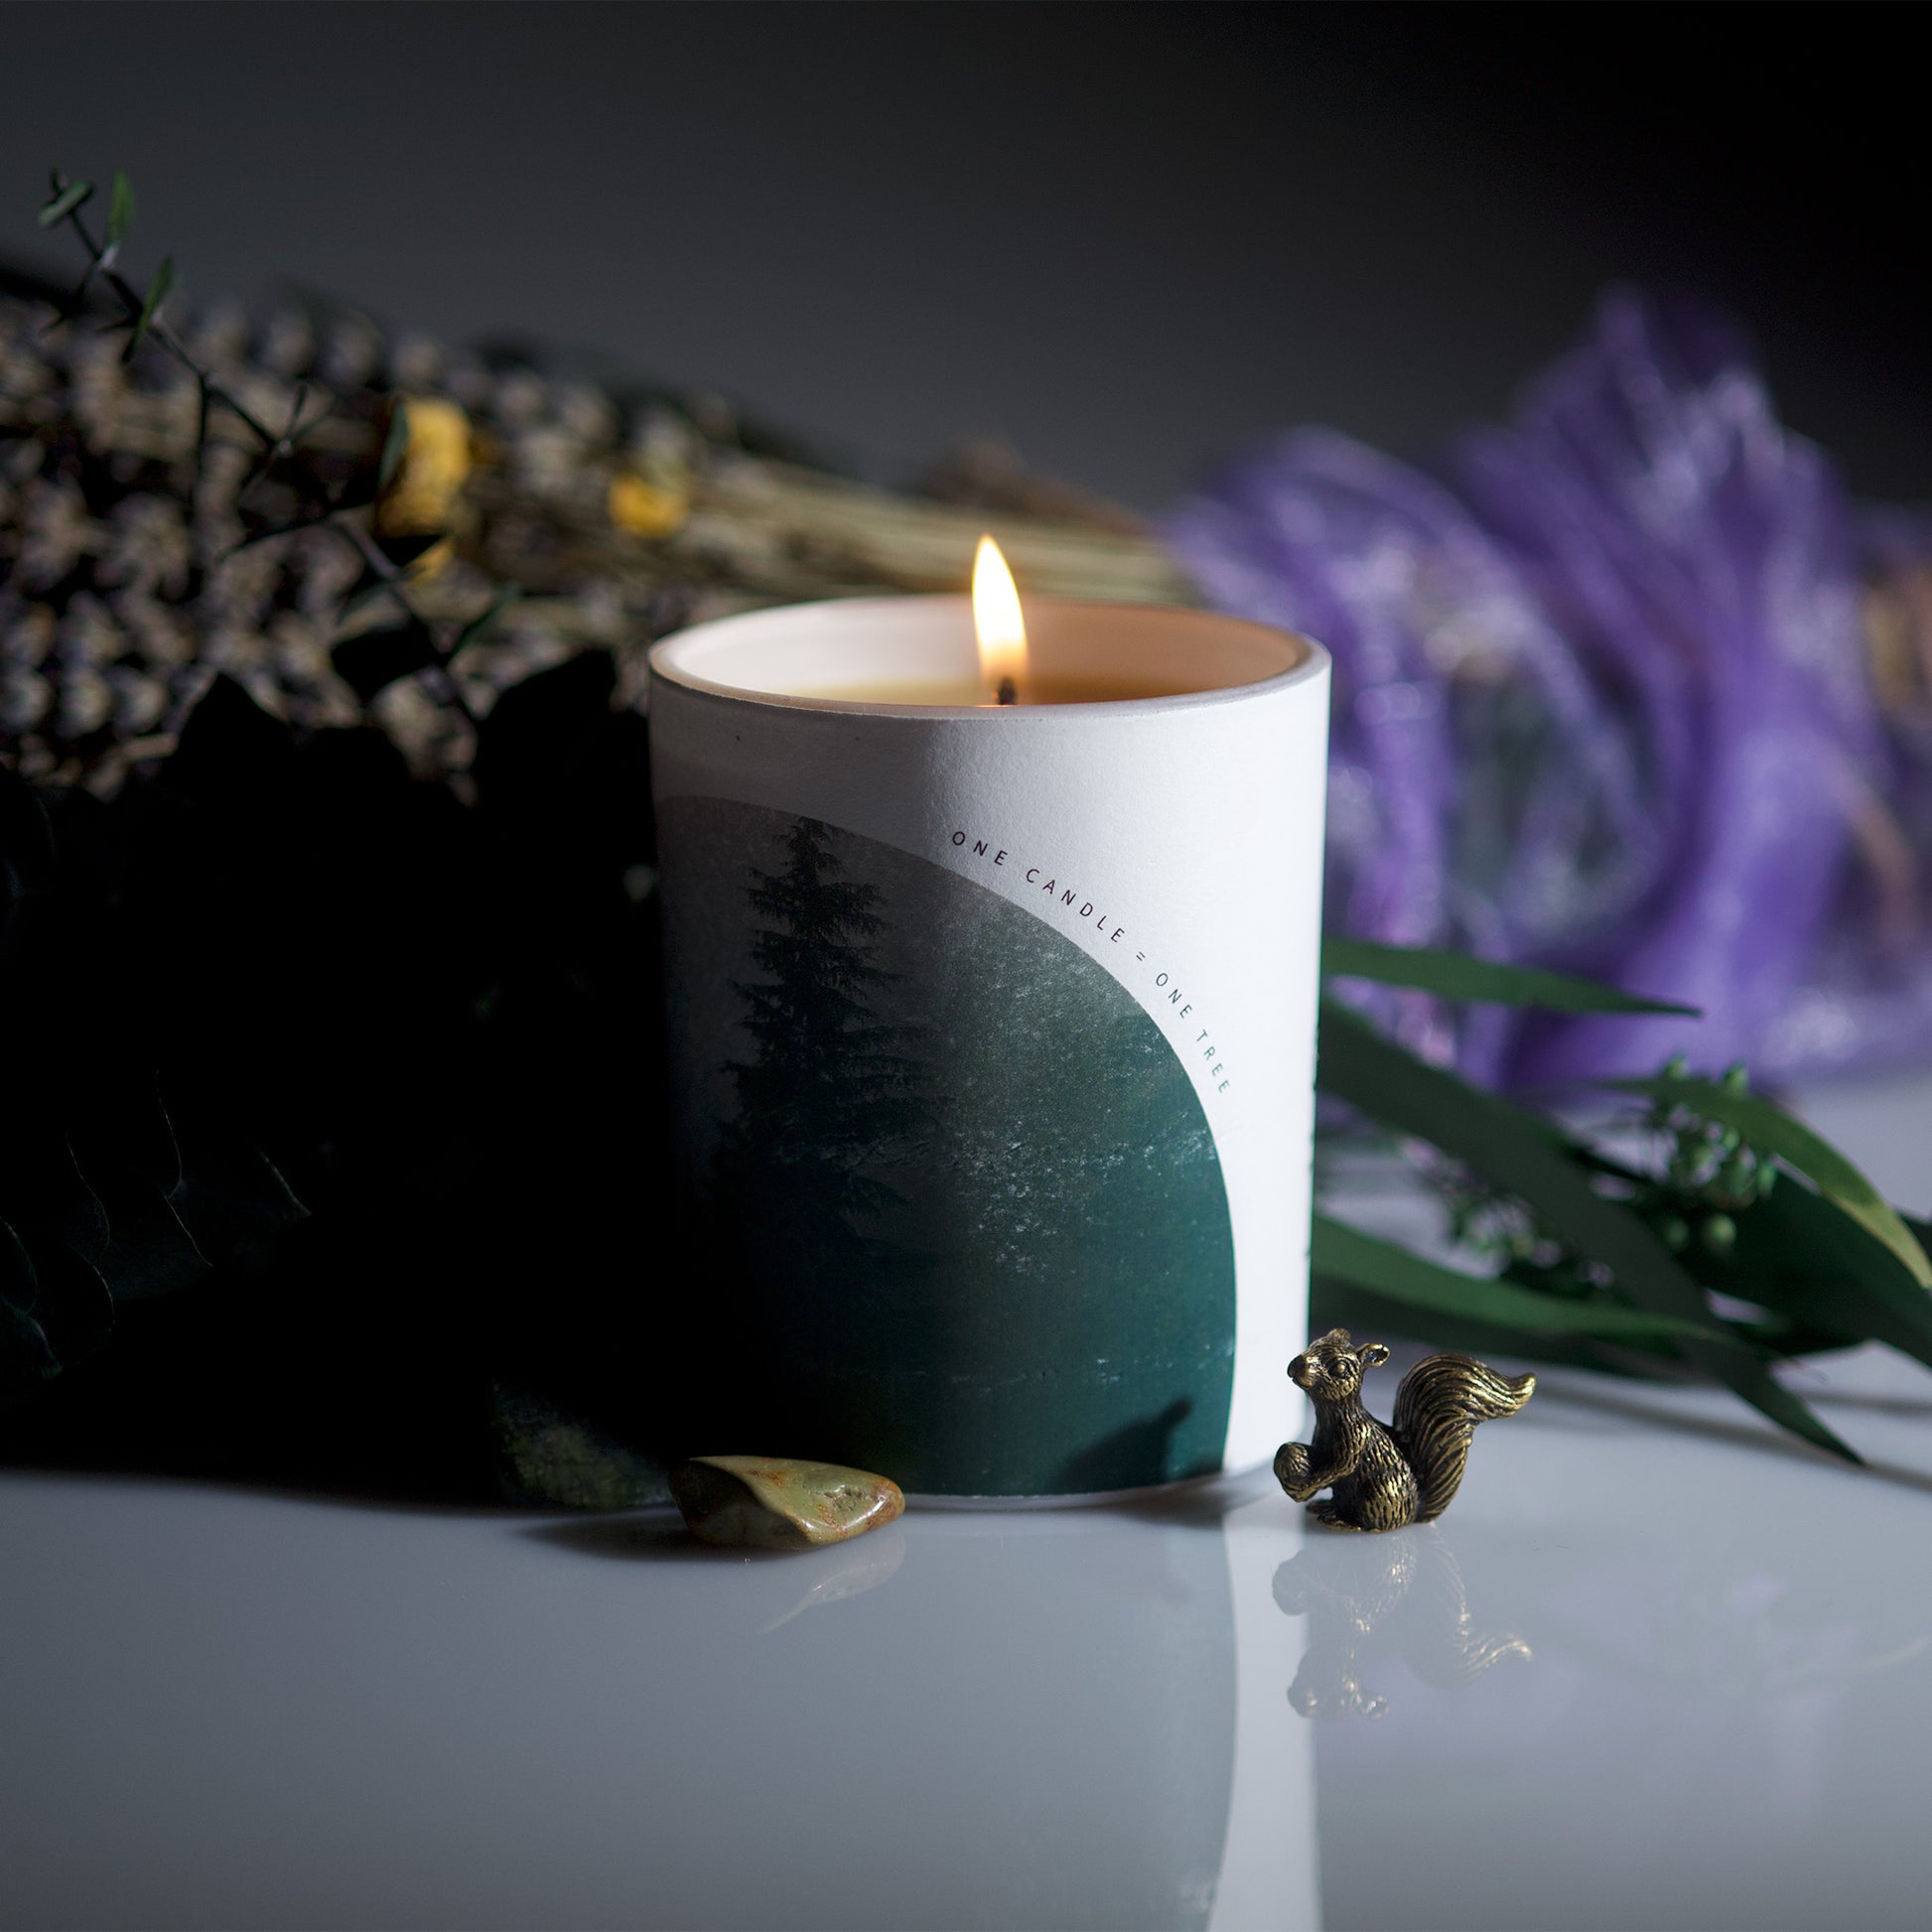 Plant Trees Candle From Hive To Home Candle Co. Aesthetic looks and earthy scents.